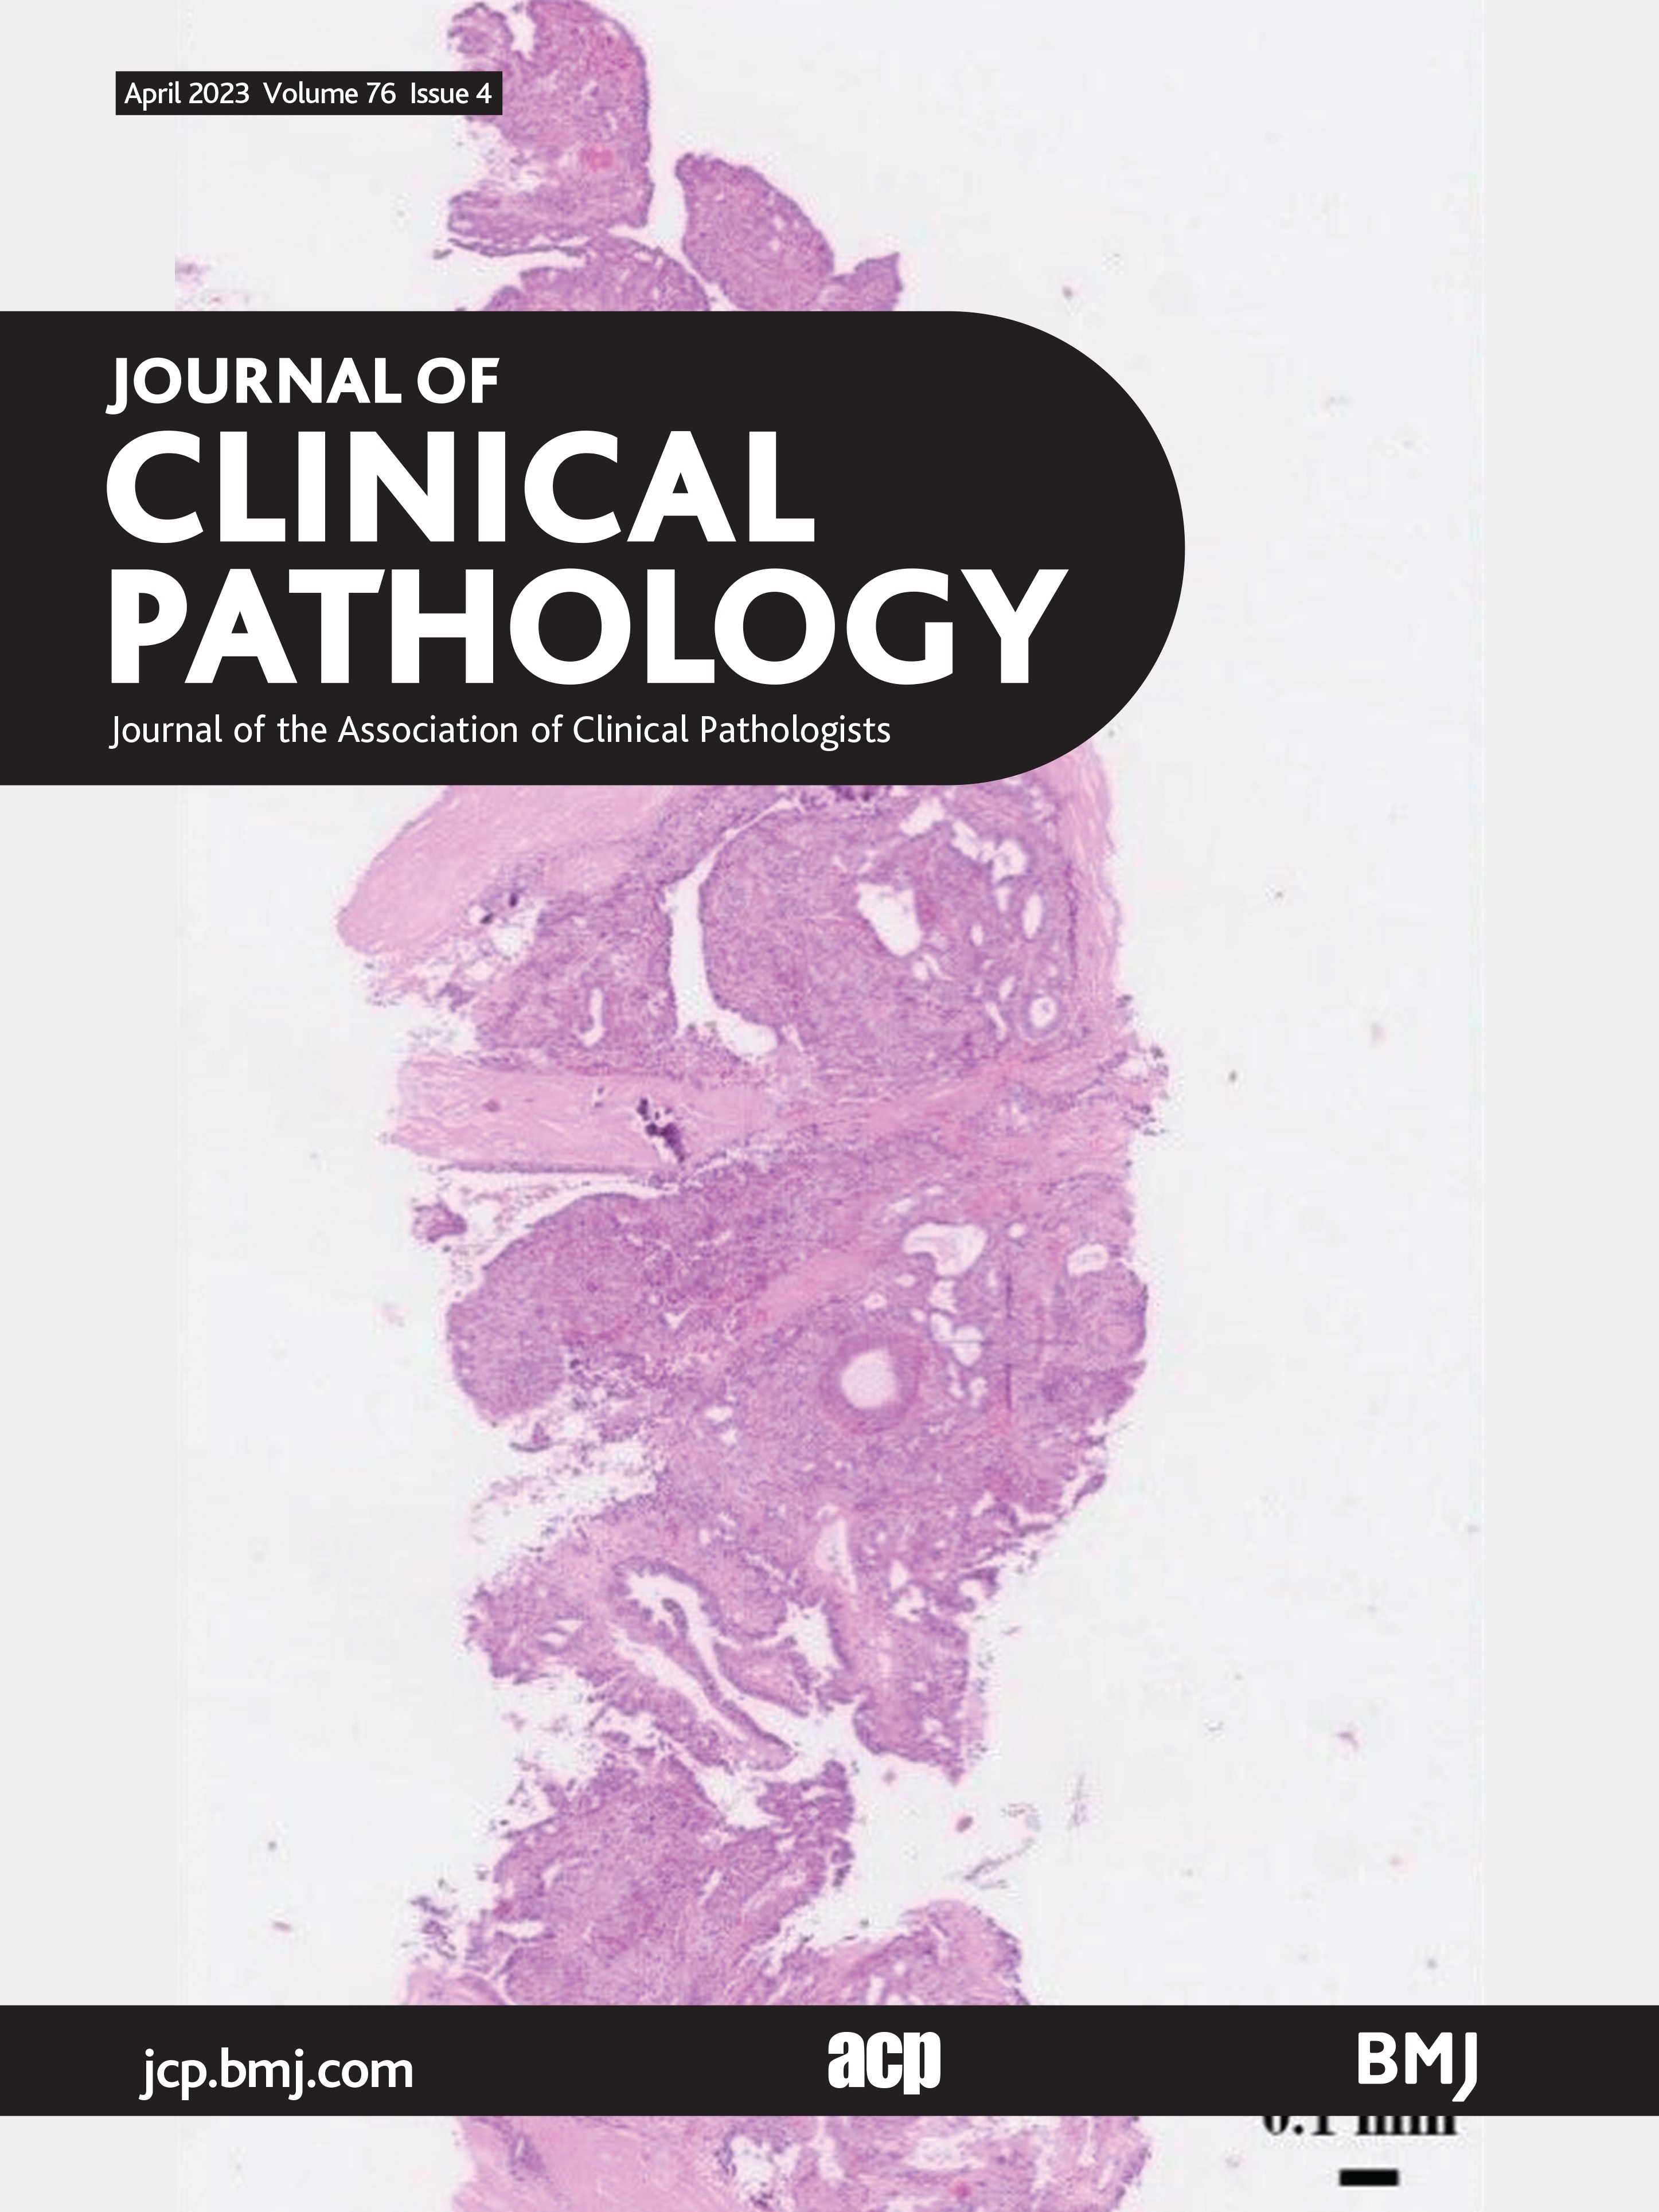 Clinicopathologic analysis of patients undergoing repeat transurethral resection of bladder tumour following an initial diagnosis of urothelial carcinoma with lamina propria invasion and variant/divergent histology